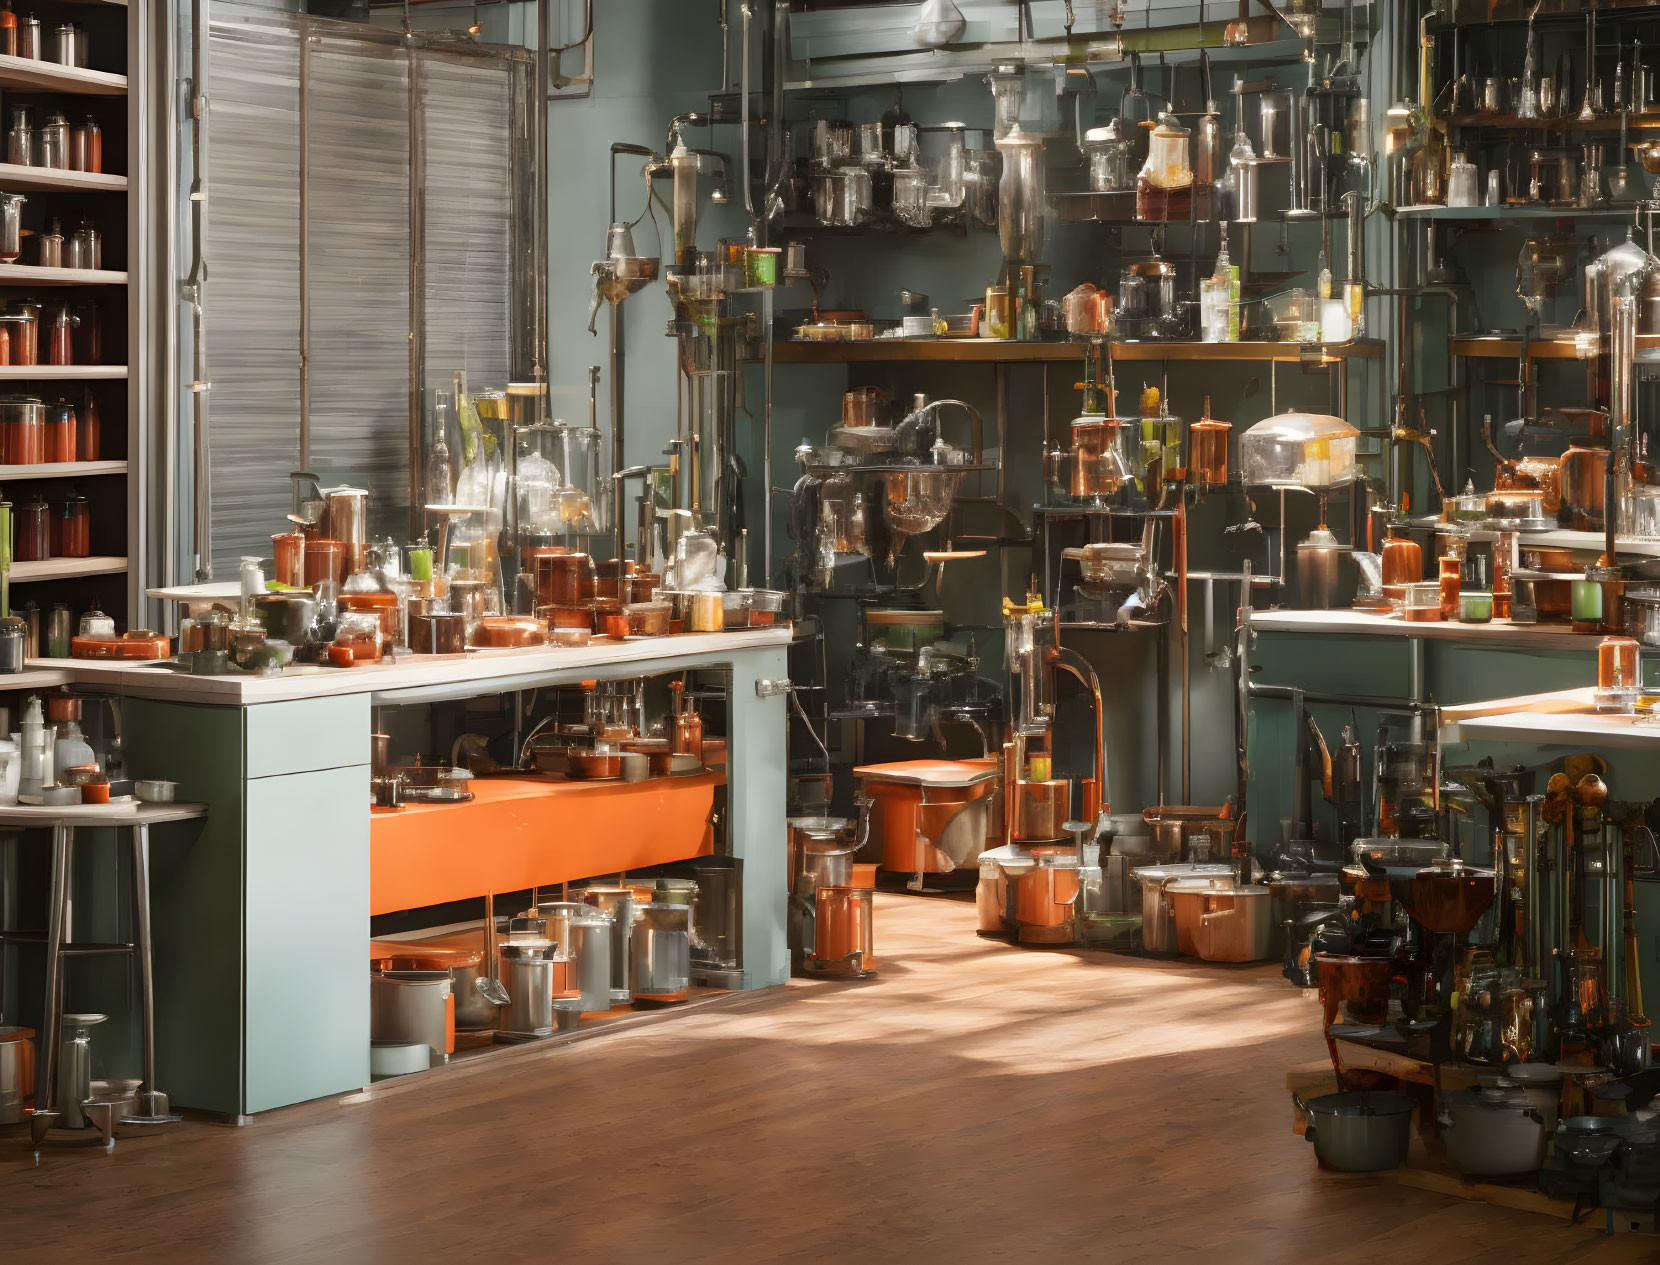 Vintage Chemistry Laboratory with Glassware and Scientific Apparatus